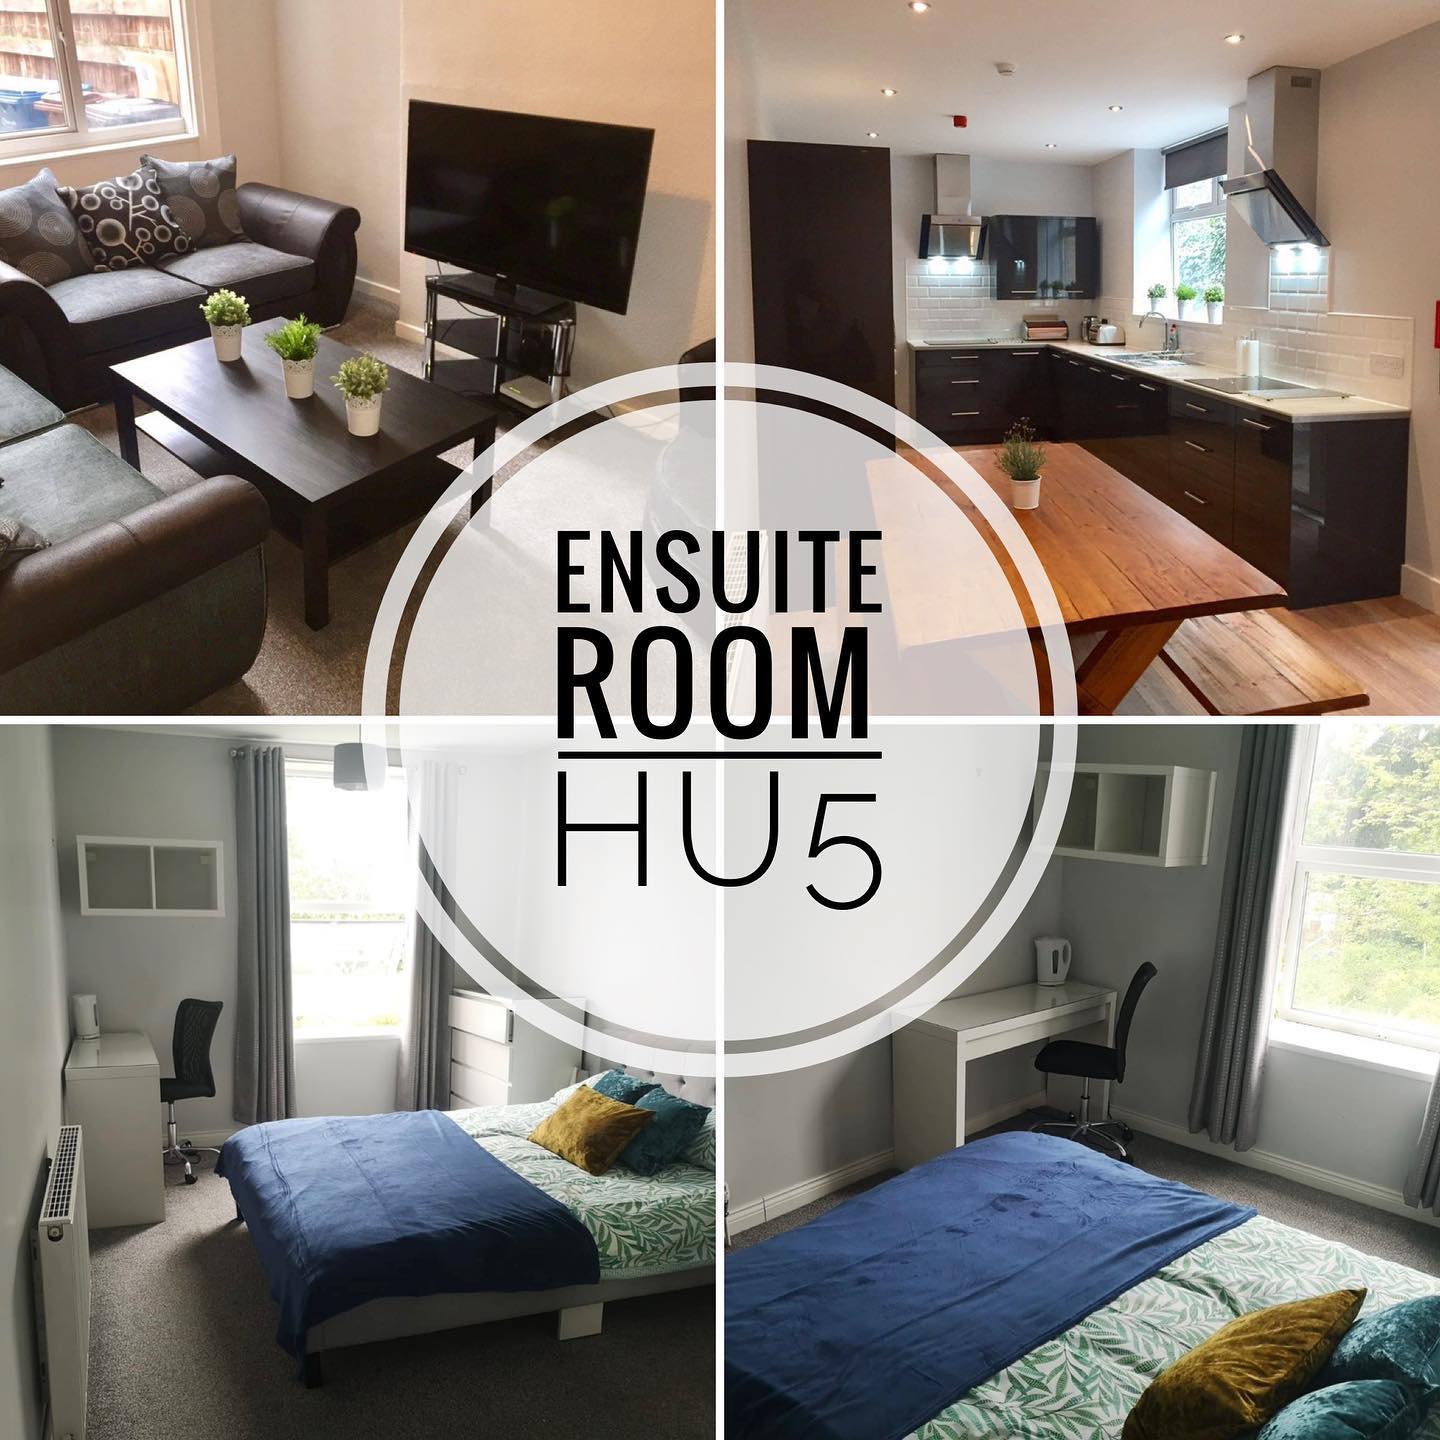 Ensuite room available on Park Grove, £475 pcm all bills included! Available immediately. Get in touch to view. #hu5 #roomstorent #hull